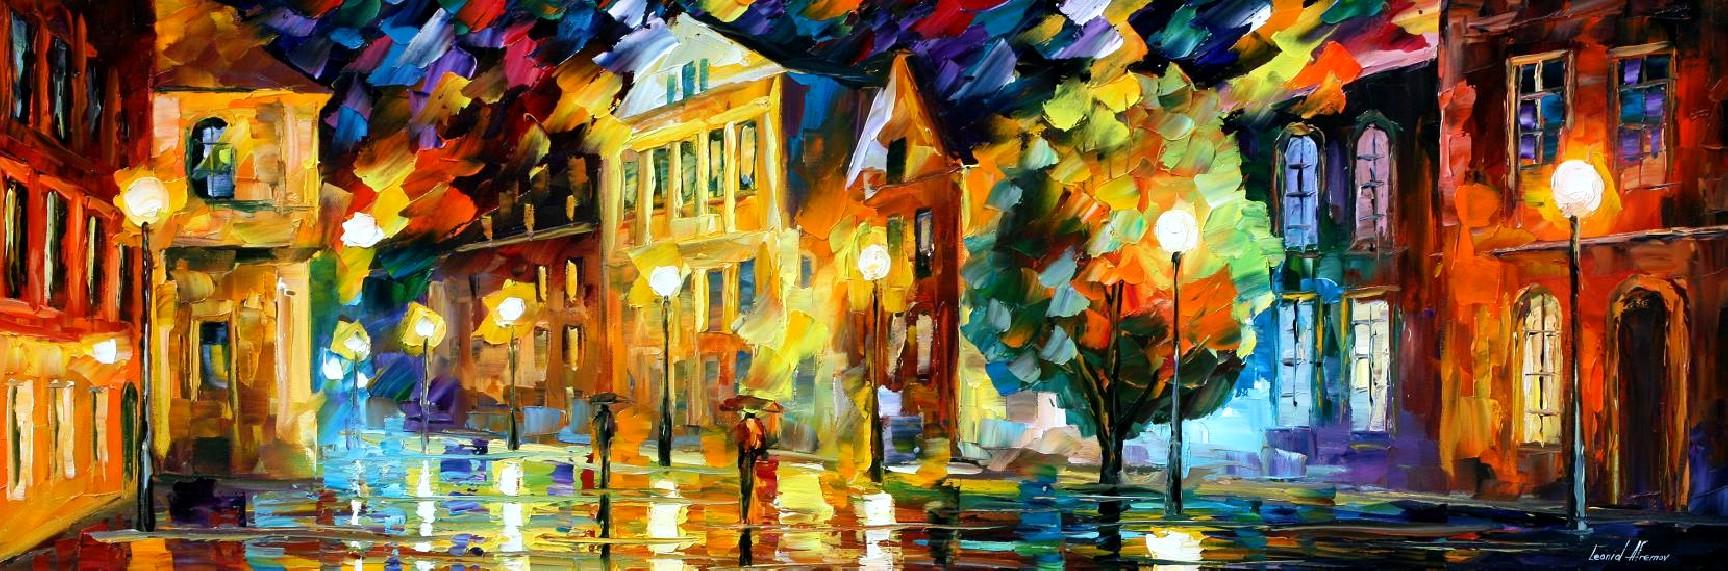 Modern impressionism palette knife oil painting City048